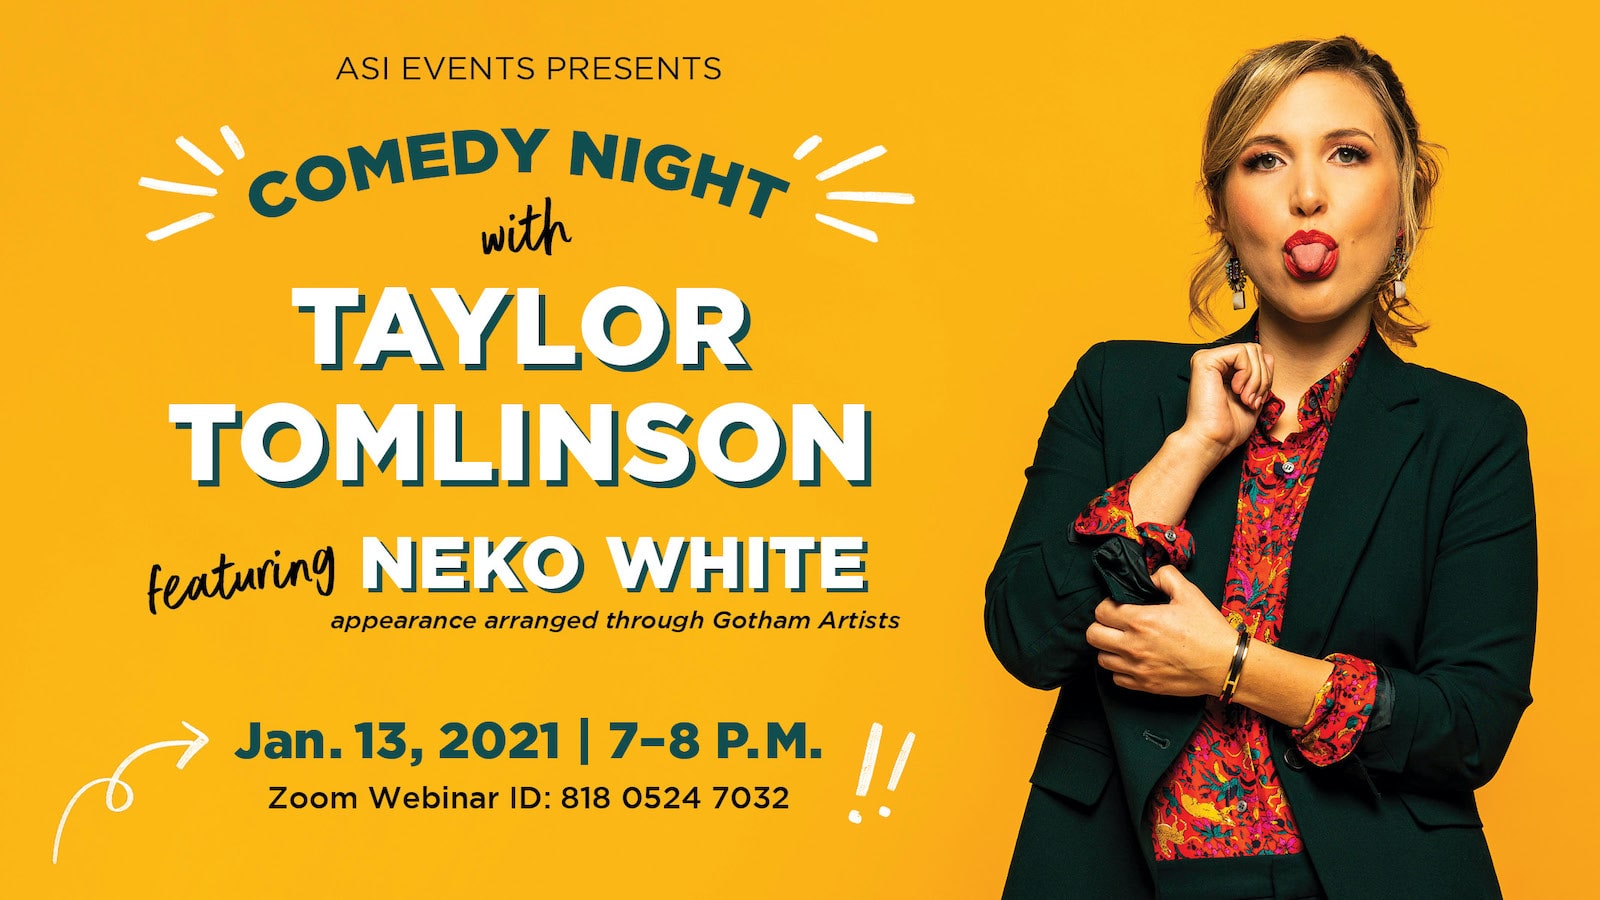 Image of comedian Taylor Tomlinson with her tongue out. The details of the event also appear against a yellow background.